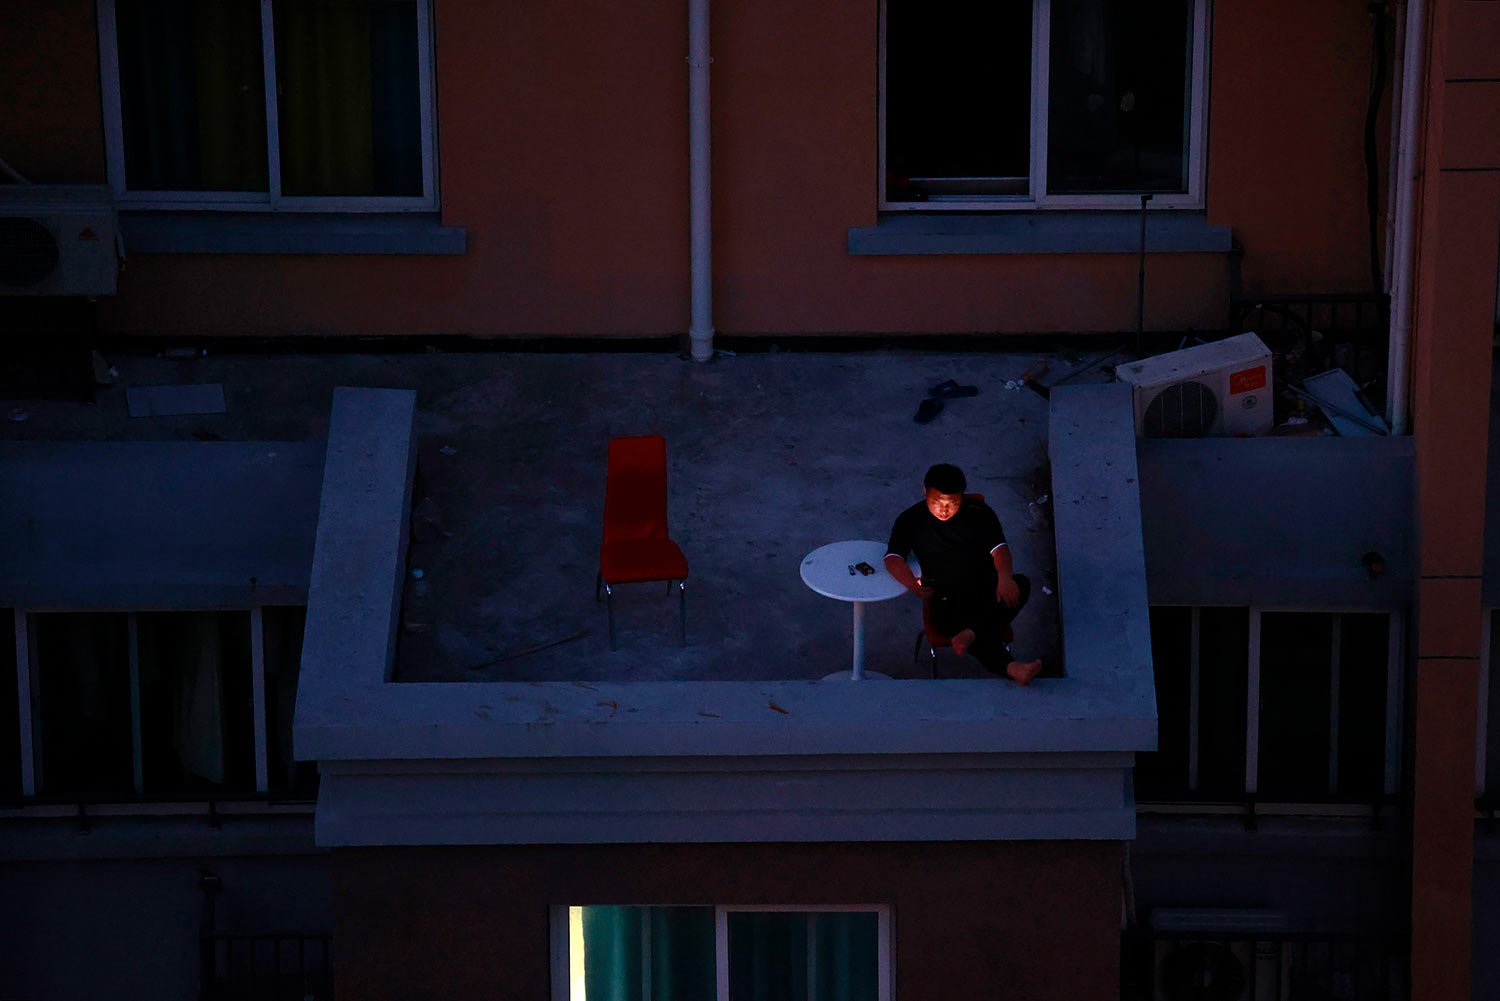  A man looks at his smartphone on a balcony in a residential community during a tight lockdown to contain a COVID-19 surge in Shanghai, China, Monday, April 11 2022.  (AP Photo) 